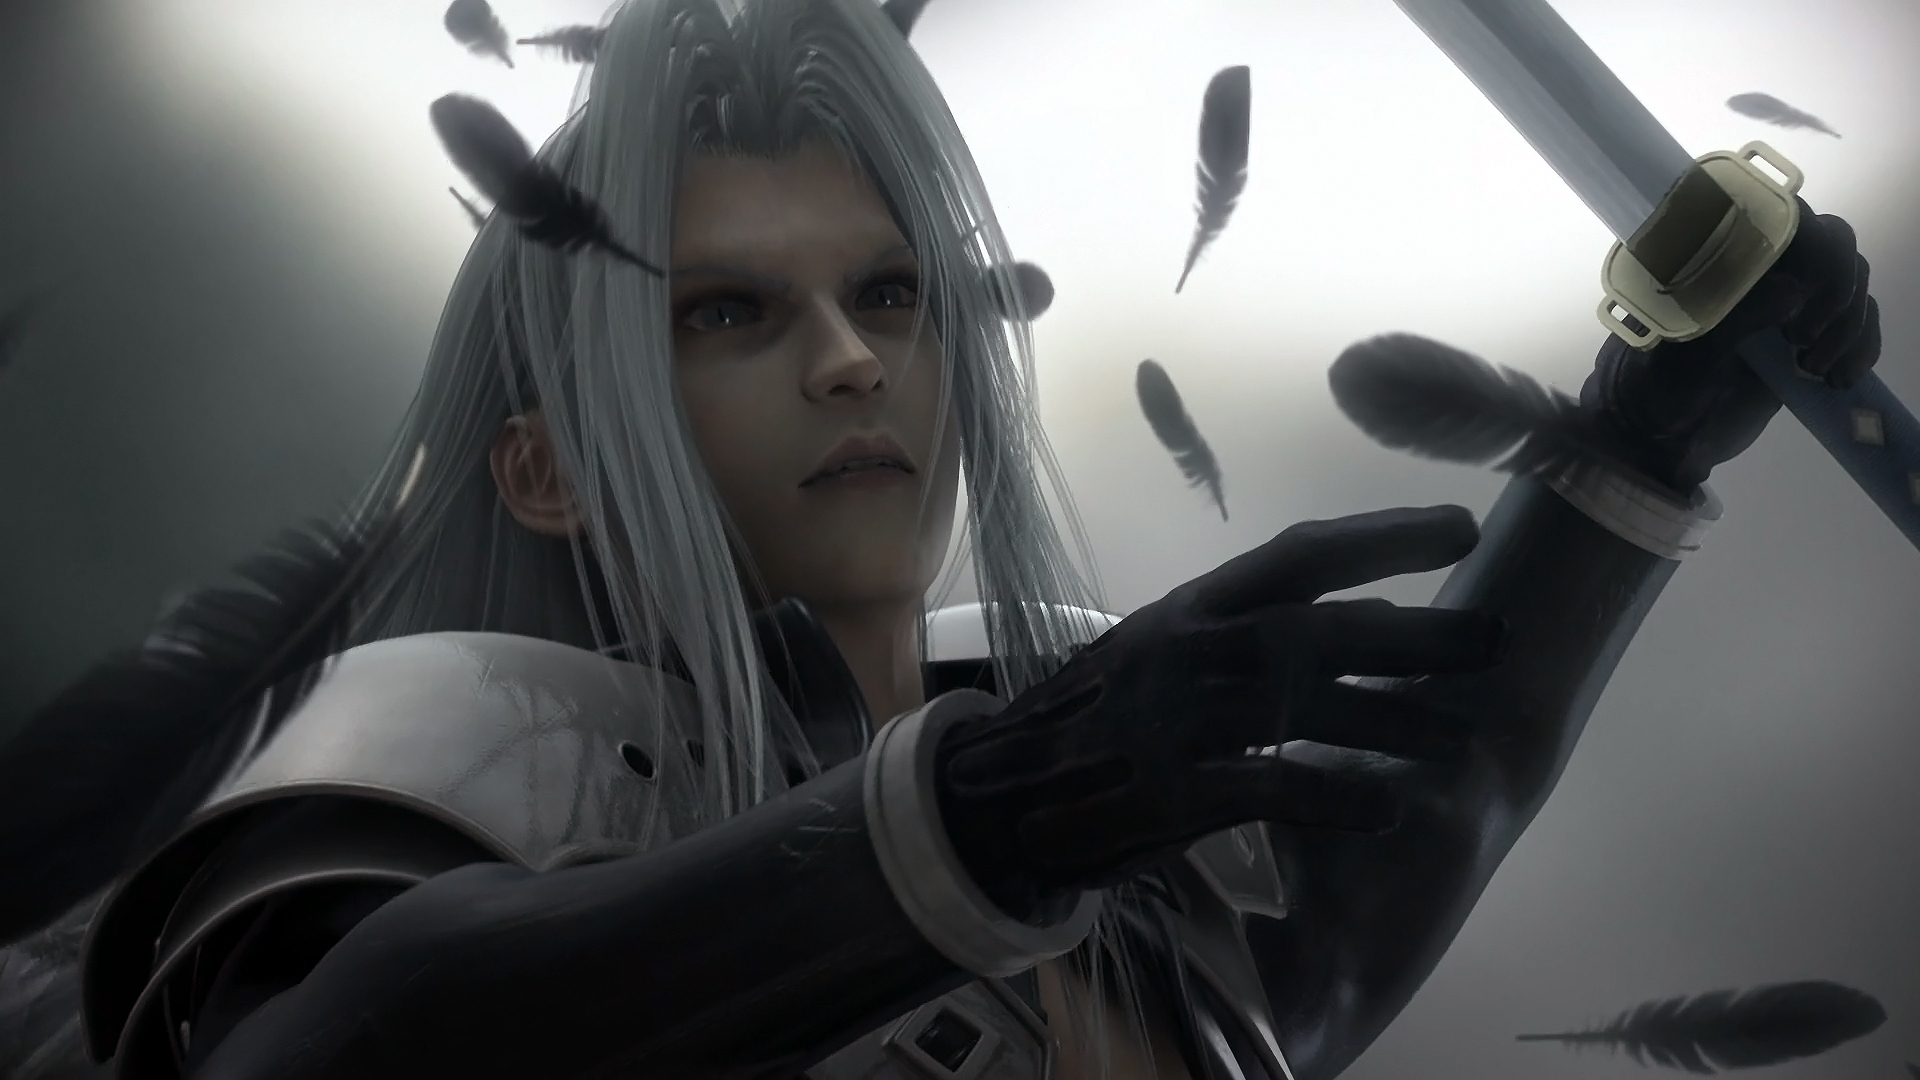 Sephiroth Image HD Wallpaper And Background